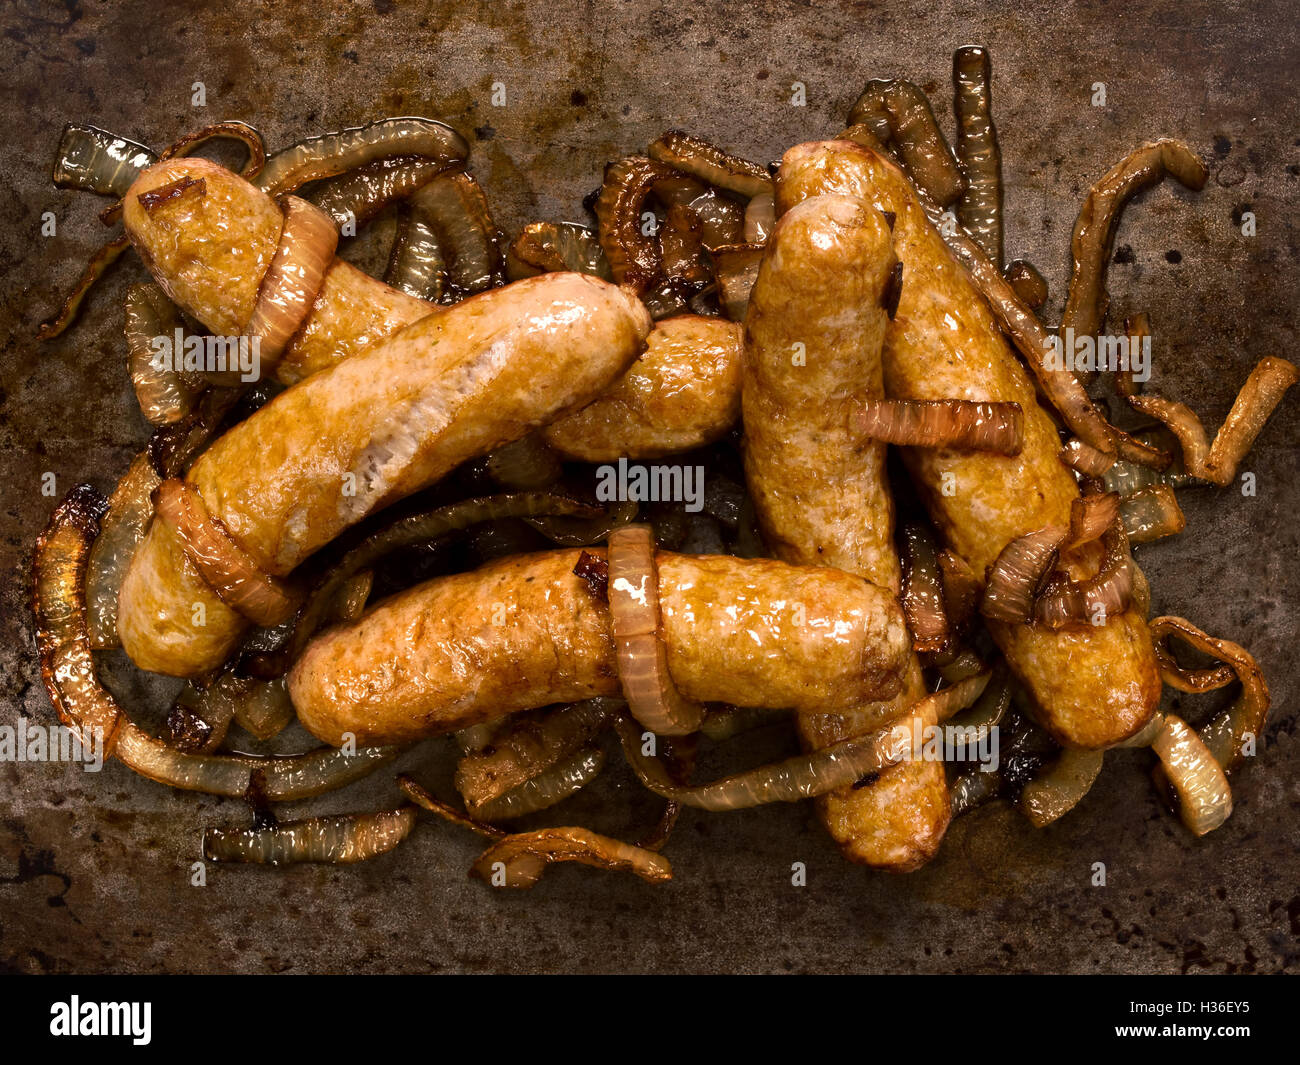 rustic sausages with caramelised onions Stock Photo